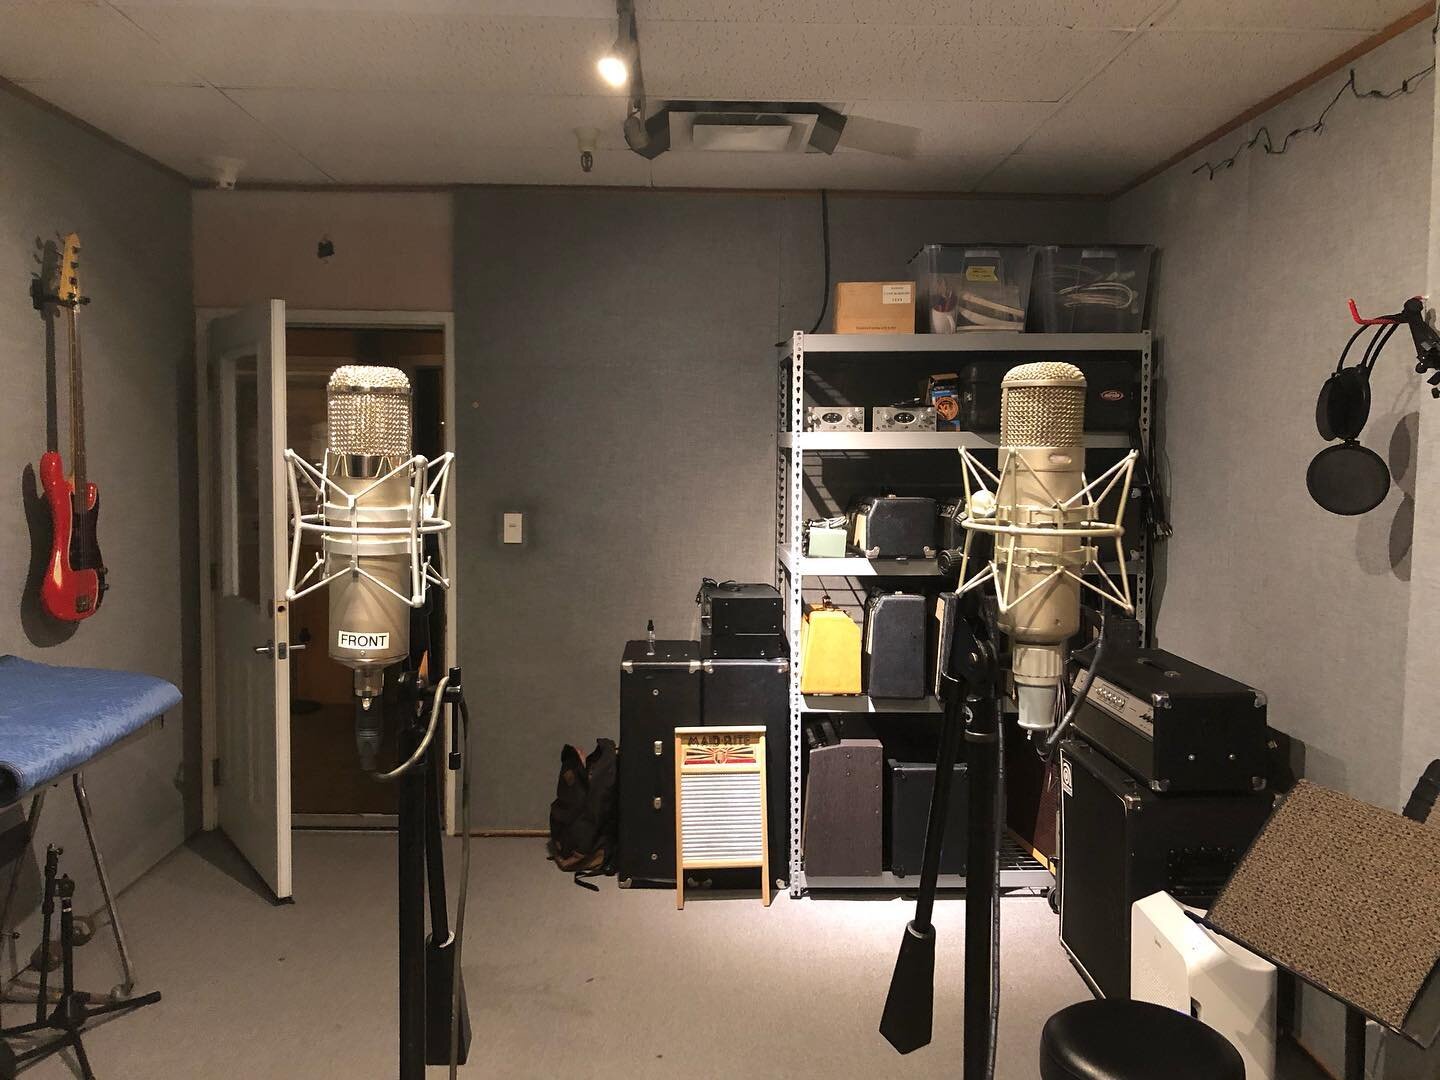 A most excellent visit to our friends @new_improved_recording in Oakland last night. Got to audition our homebrew U47 clone against their original Neumann (they sounded pretty similar!) Lots of music was auditioned through their insane @atc_loudspeak